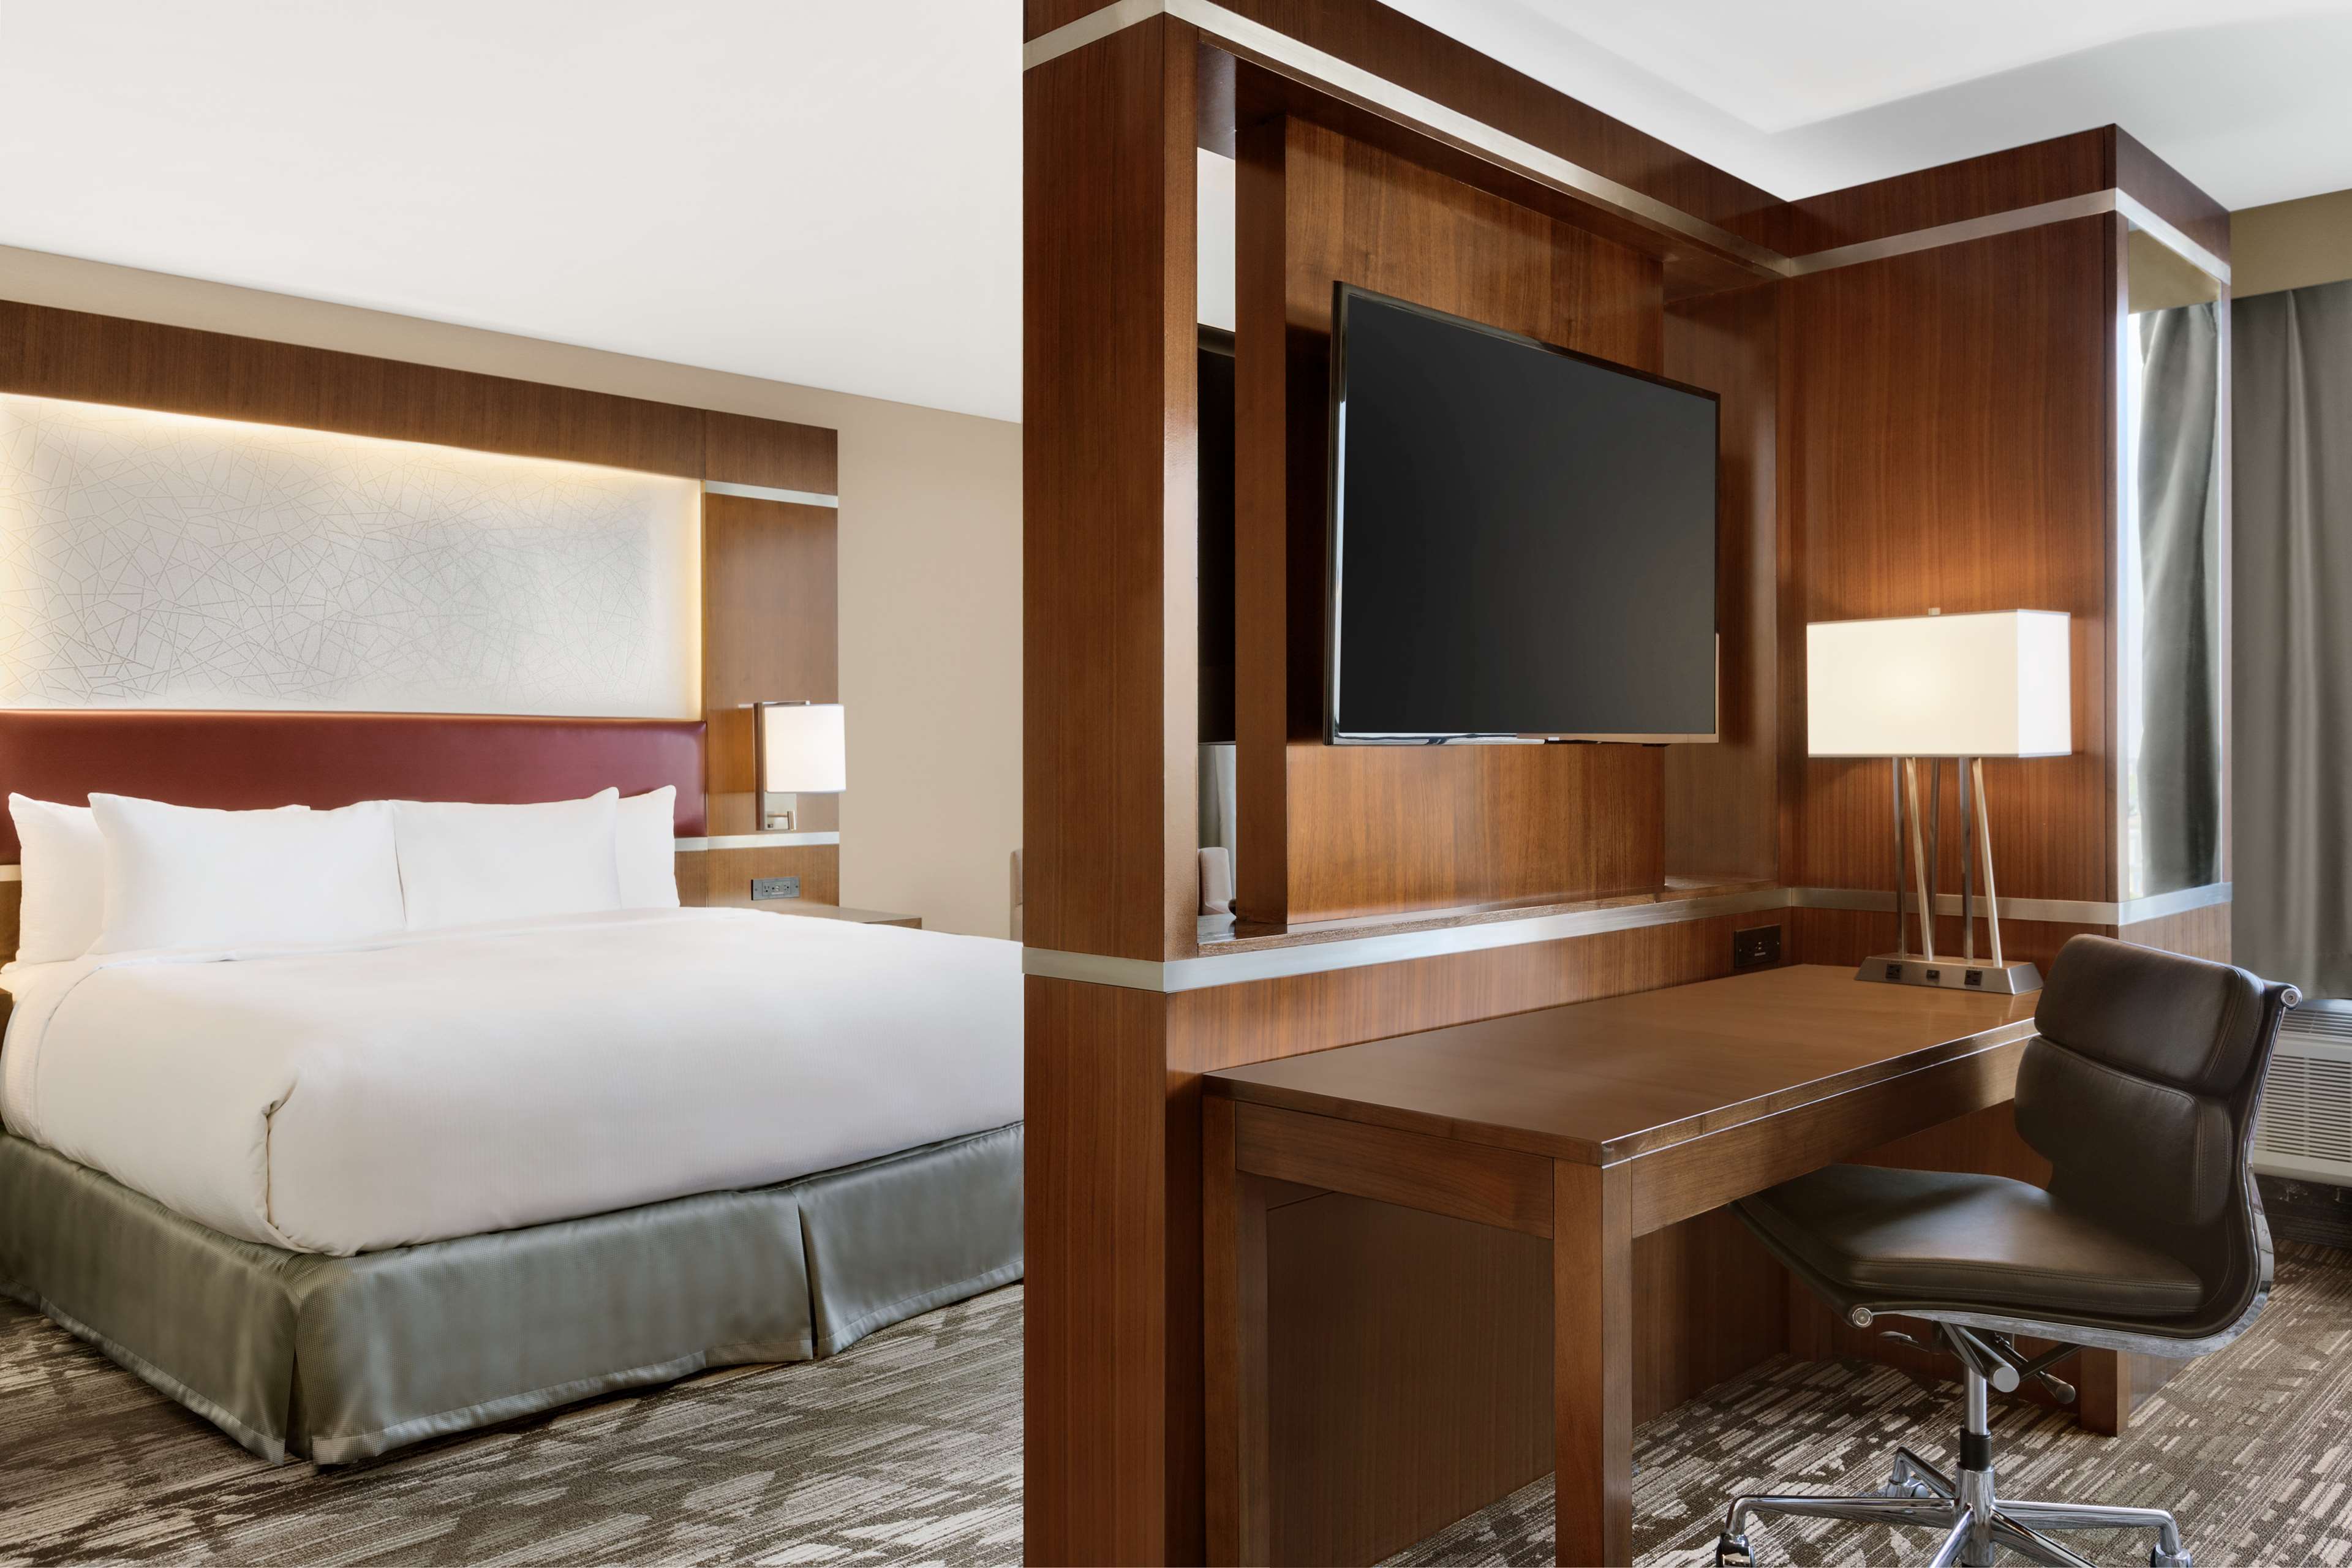 Images DoubleTree by Hilton Hotel Toronto Airport West